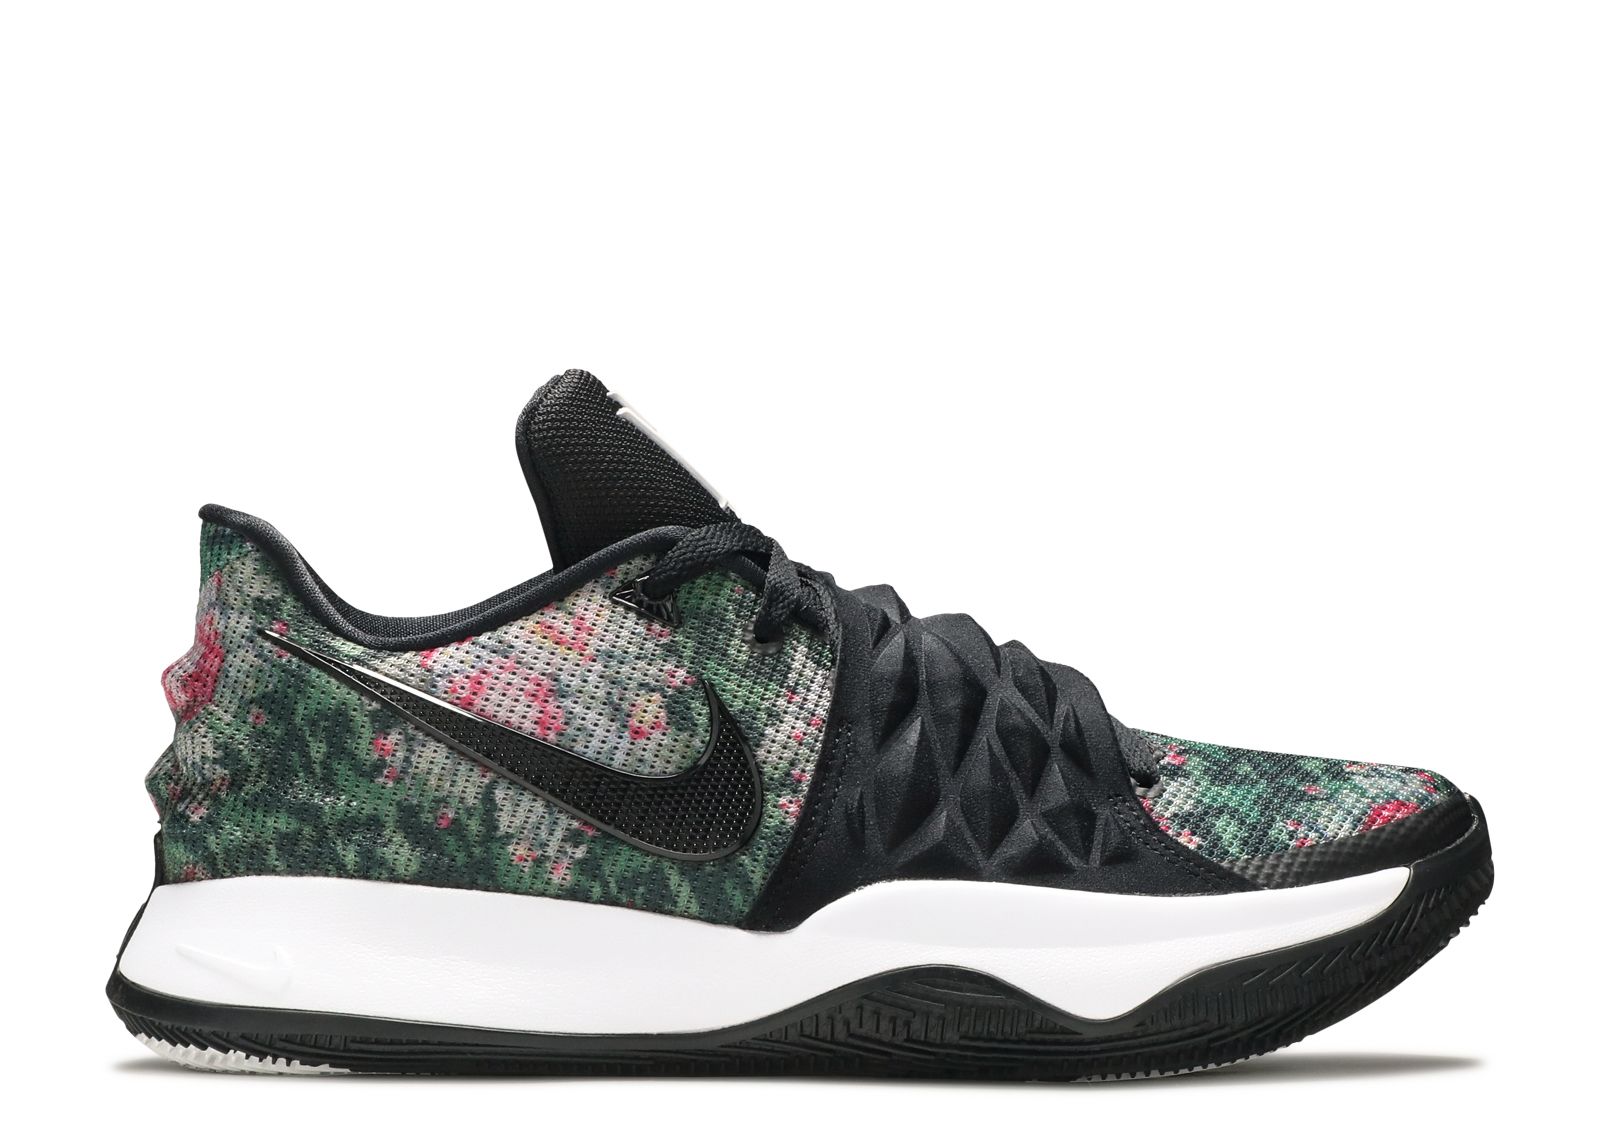 Kyrie Low 'Floral' - Nike - AO8979 002 